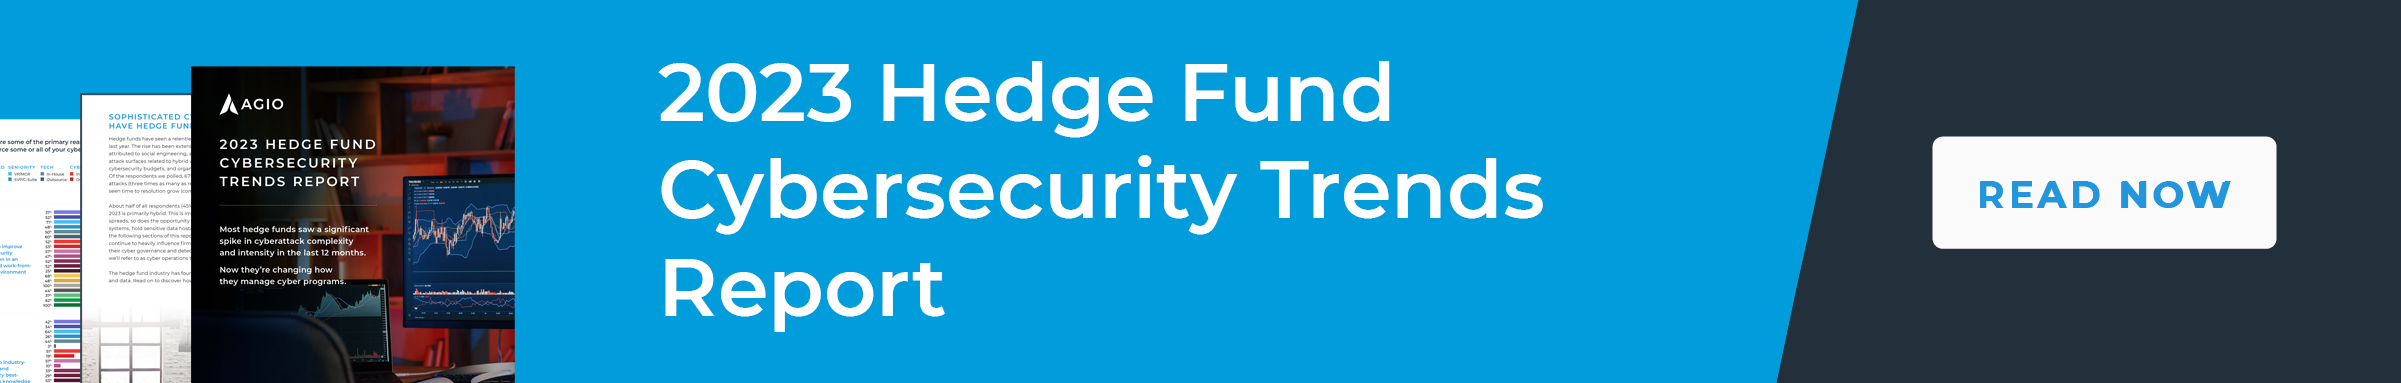 2023 hedge fund cybersecurity trends report